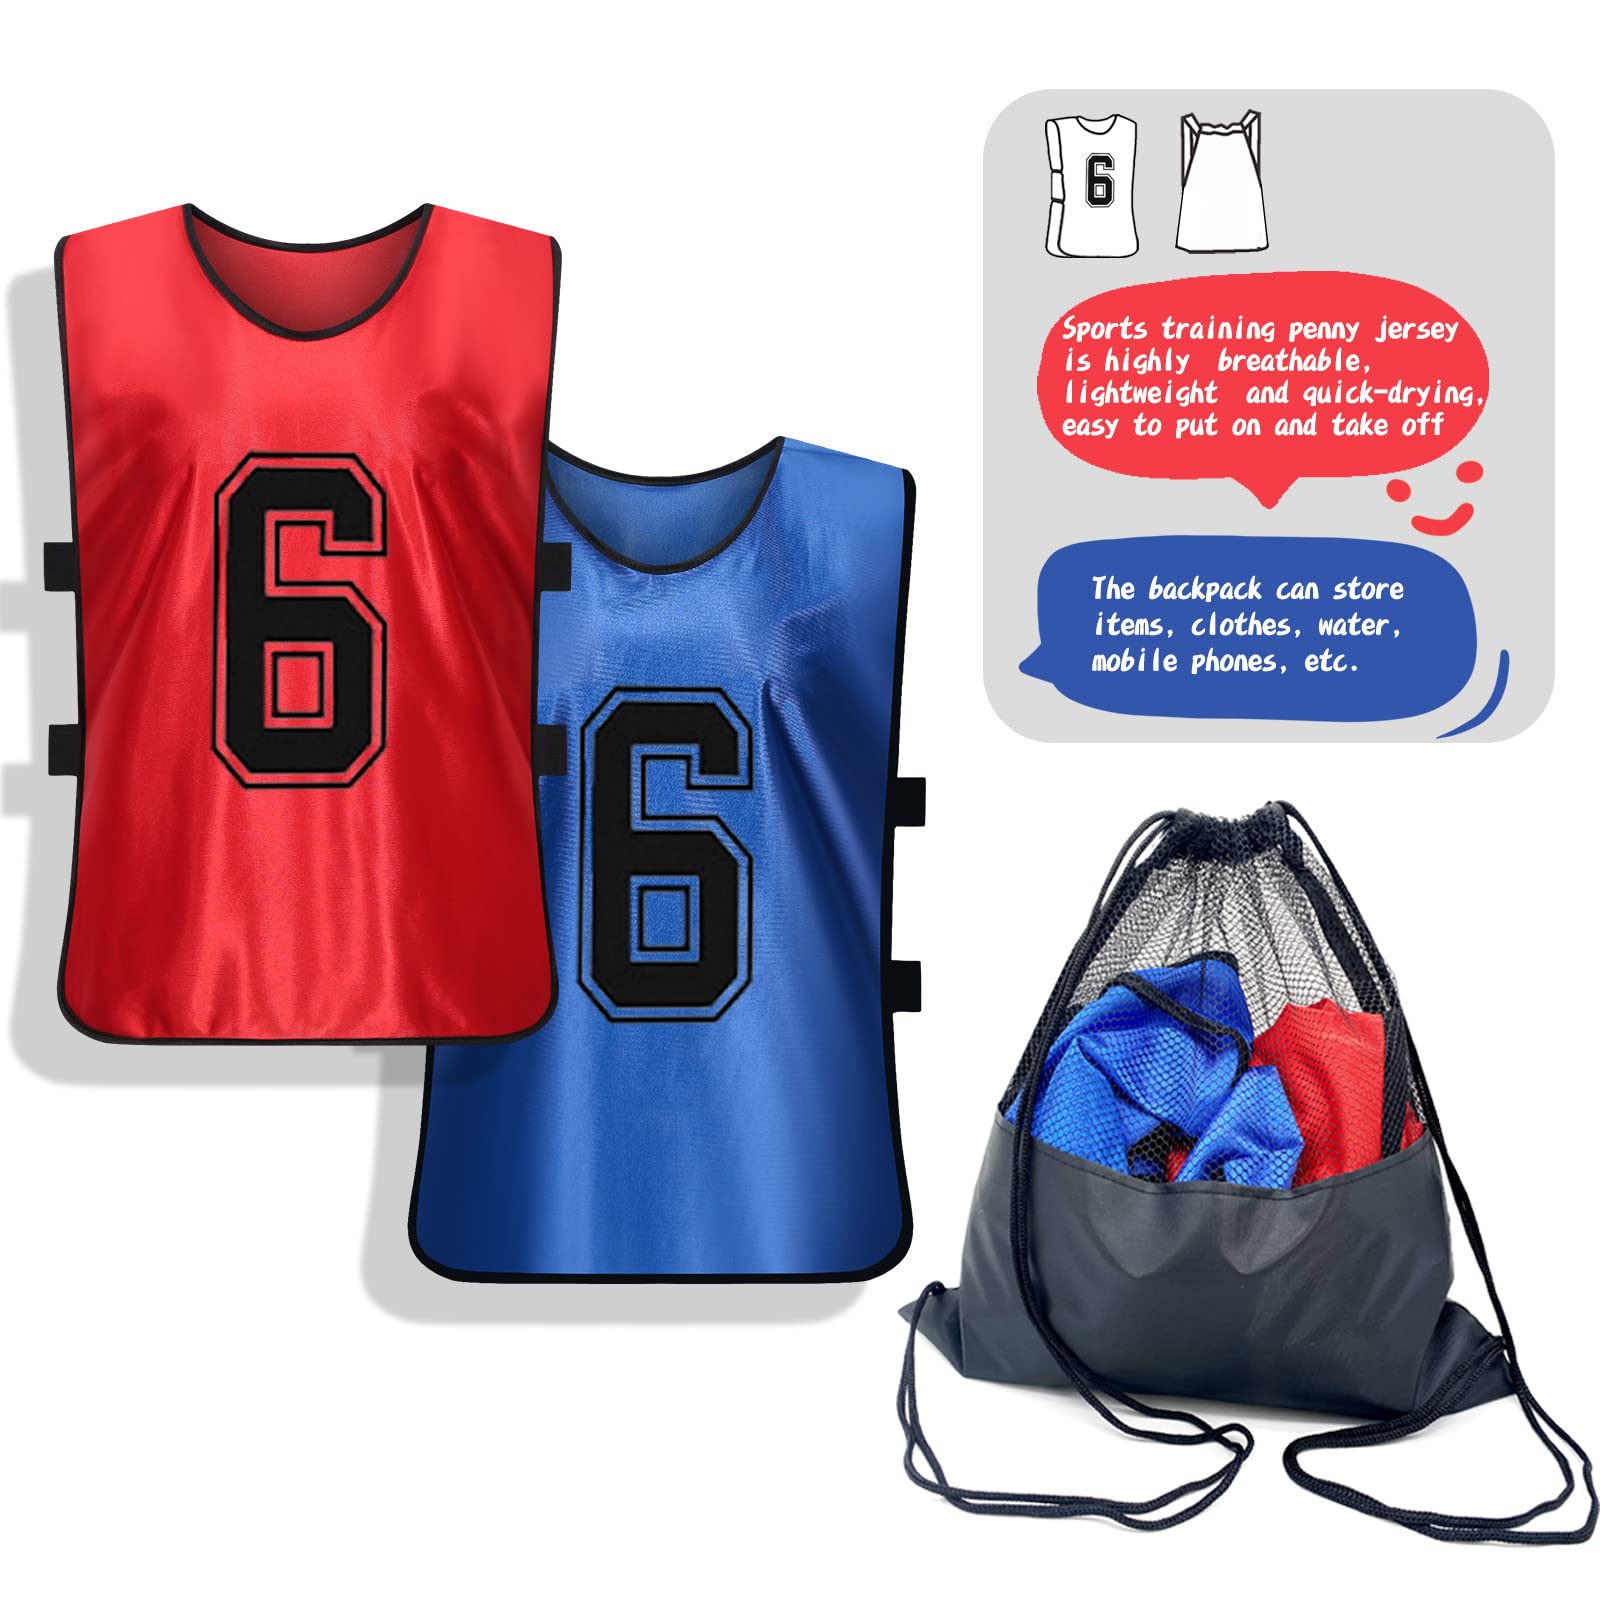 PULUOMASI Sports Pinnies-Numbered Practice Vest Pennies for Soccer Basketball Jersey Bibs -Set of 12/Youth Adults Team